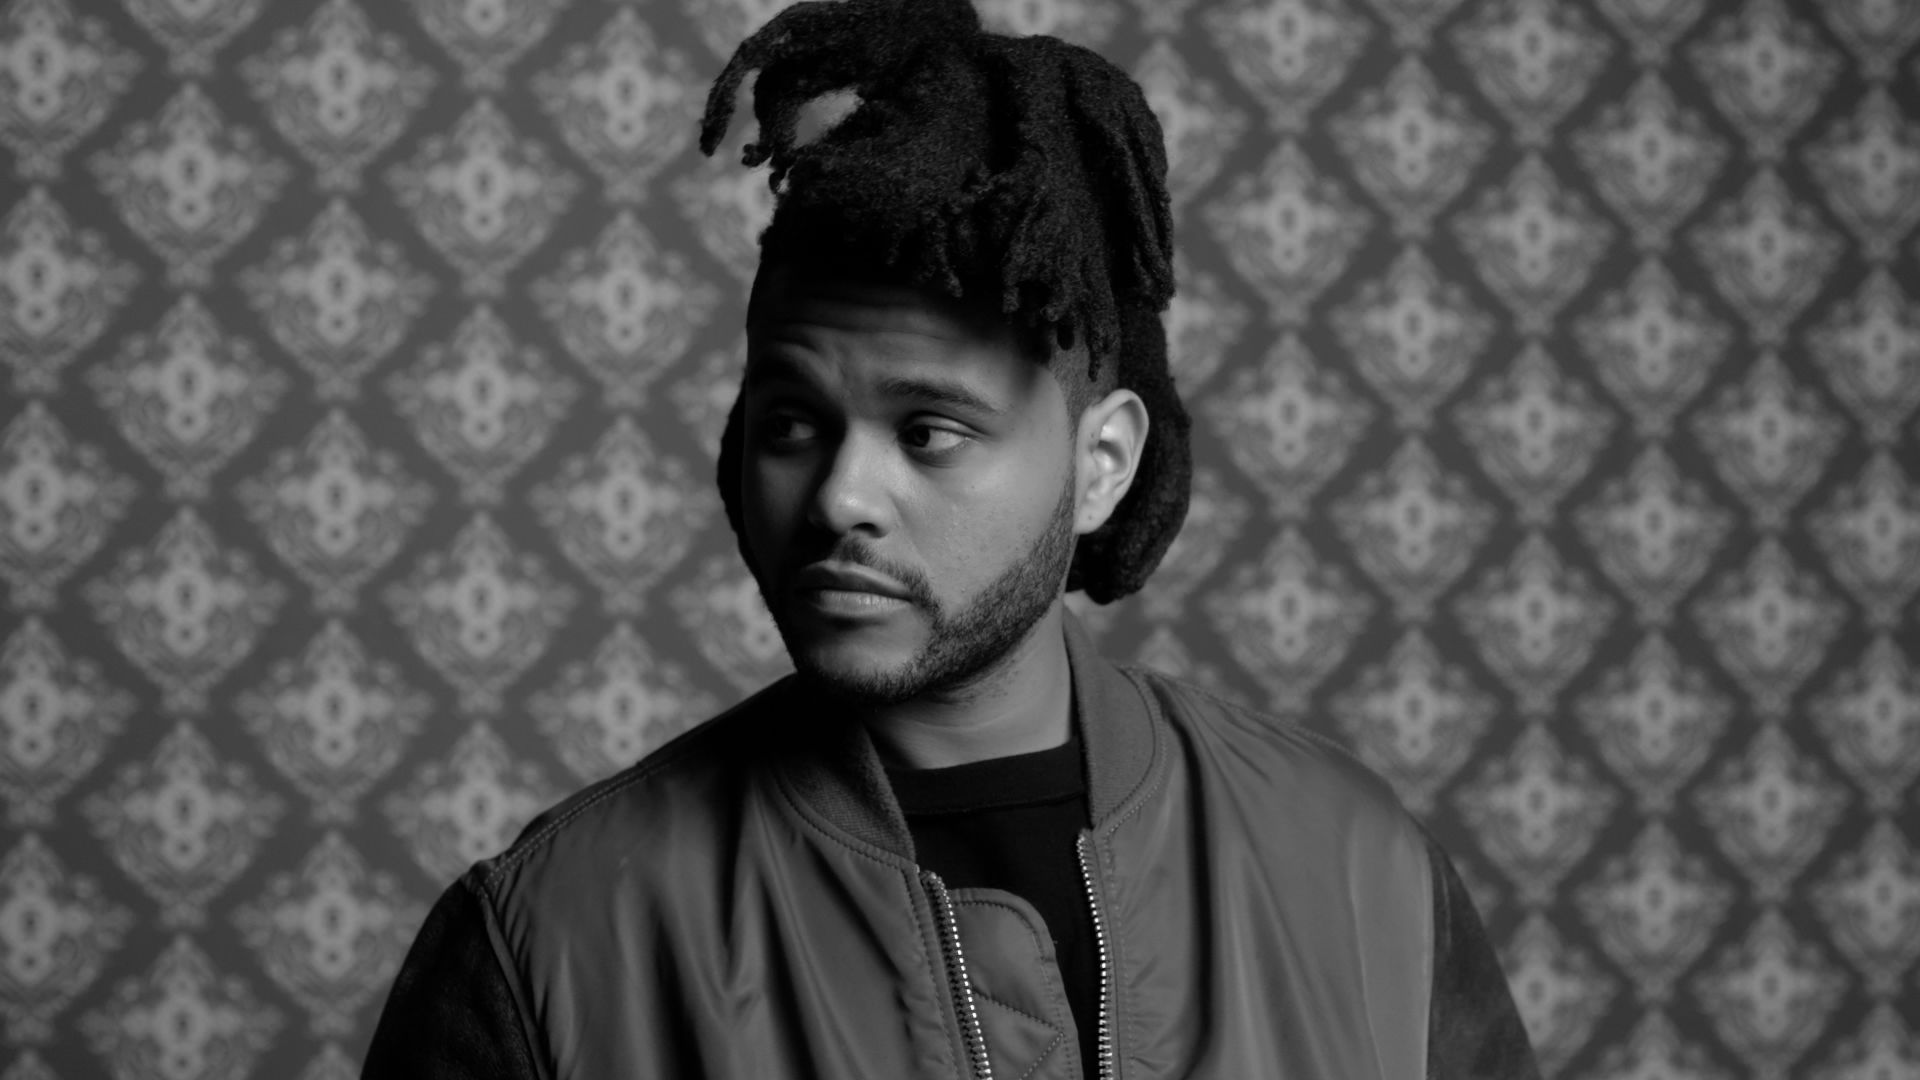 Thinking about the weekend. The Weeknd. Weekend. Еру цшсутв.